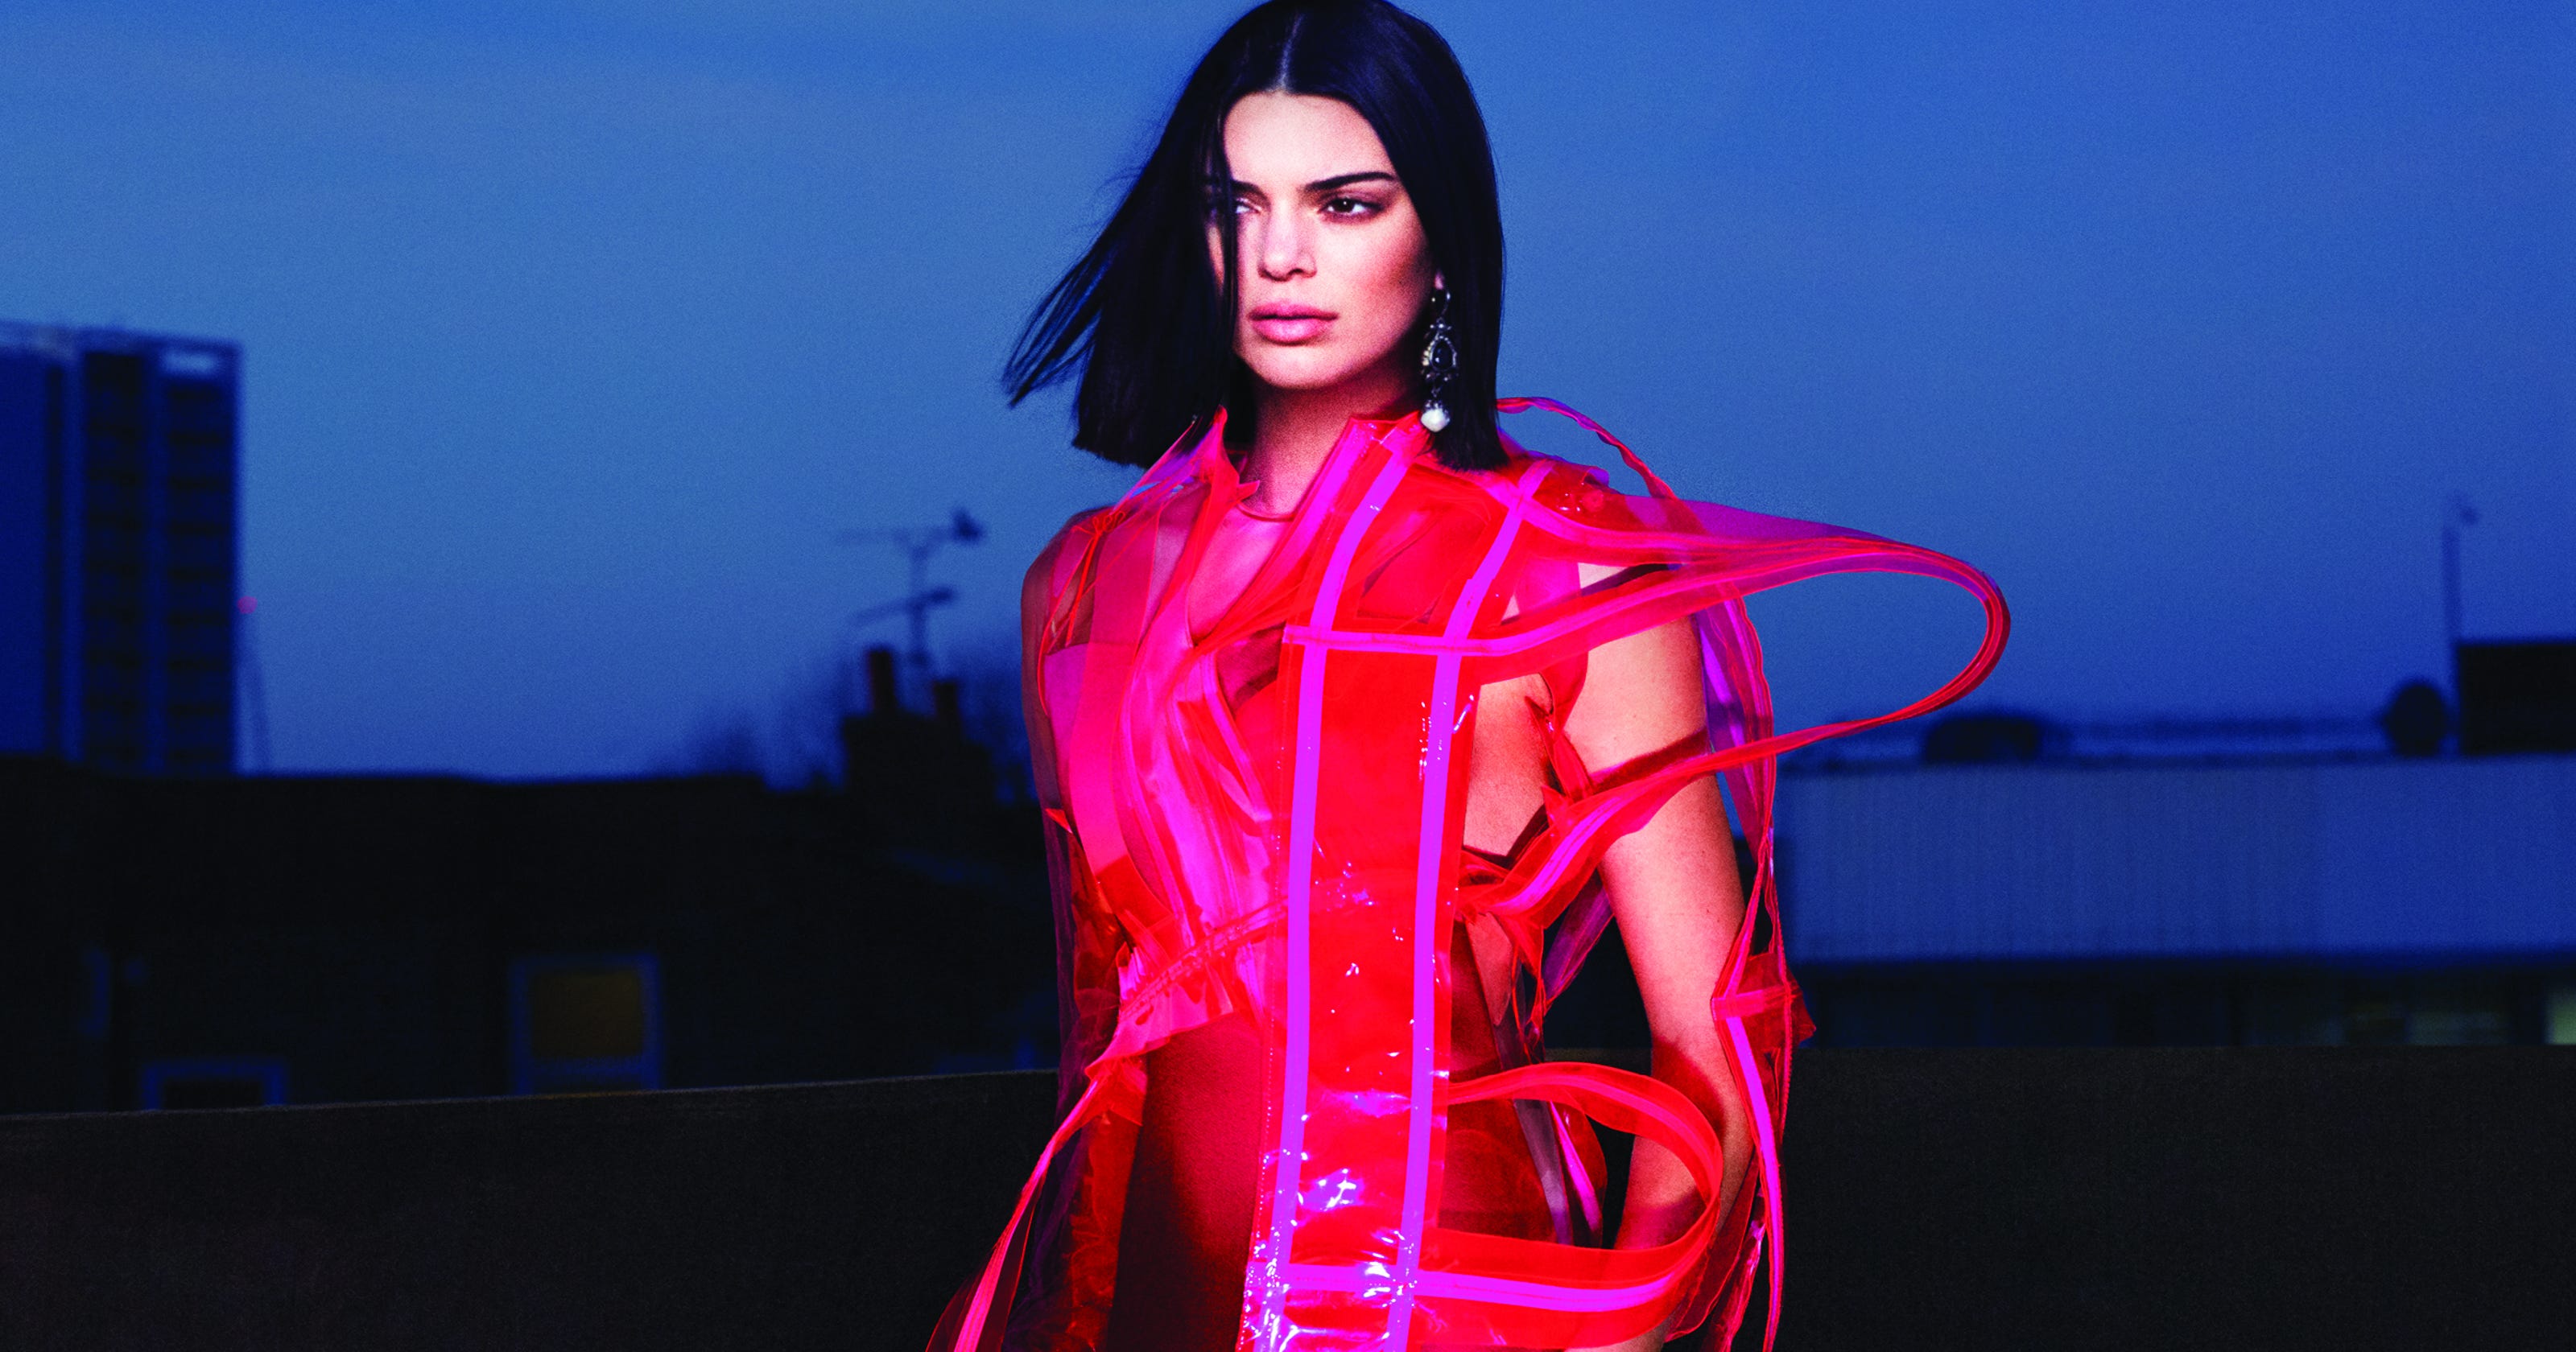 Kendall Jenner tells 'Vogue': 'I'm not gay'